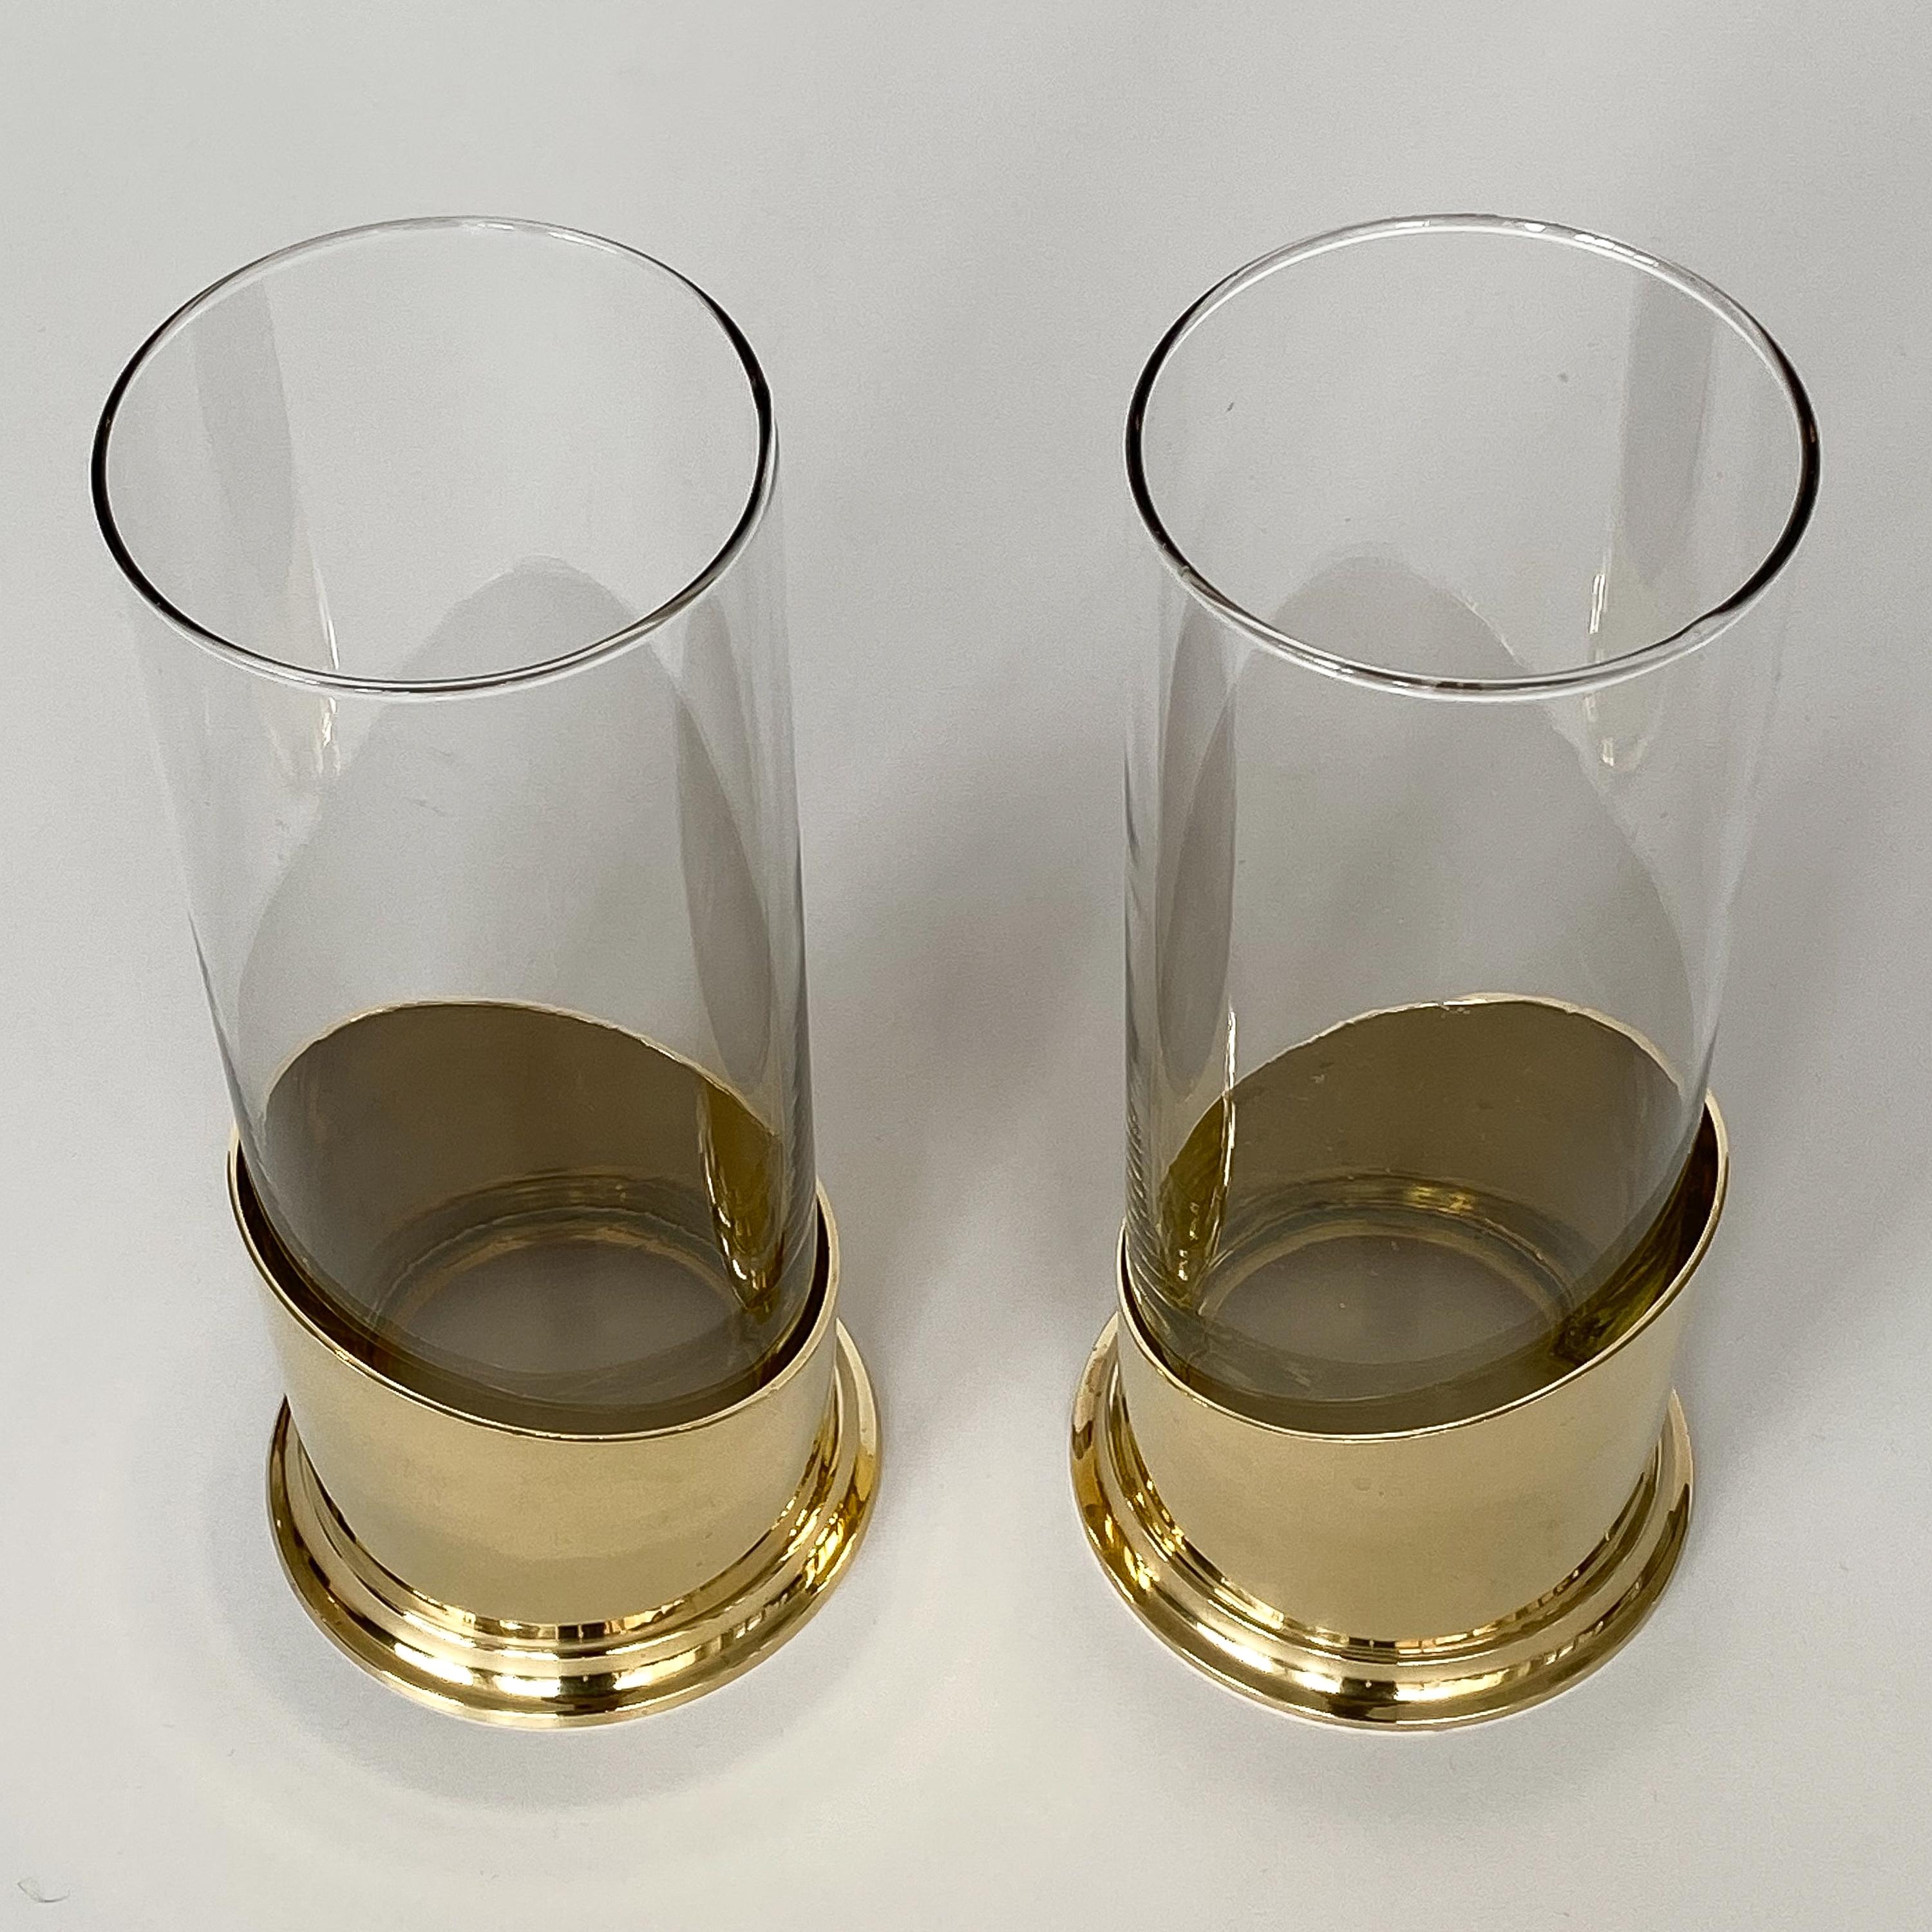 Pair of Brass and Glass Hurricane Candleholders / Vases 2